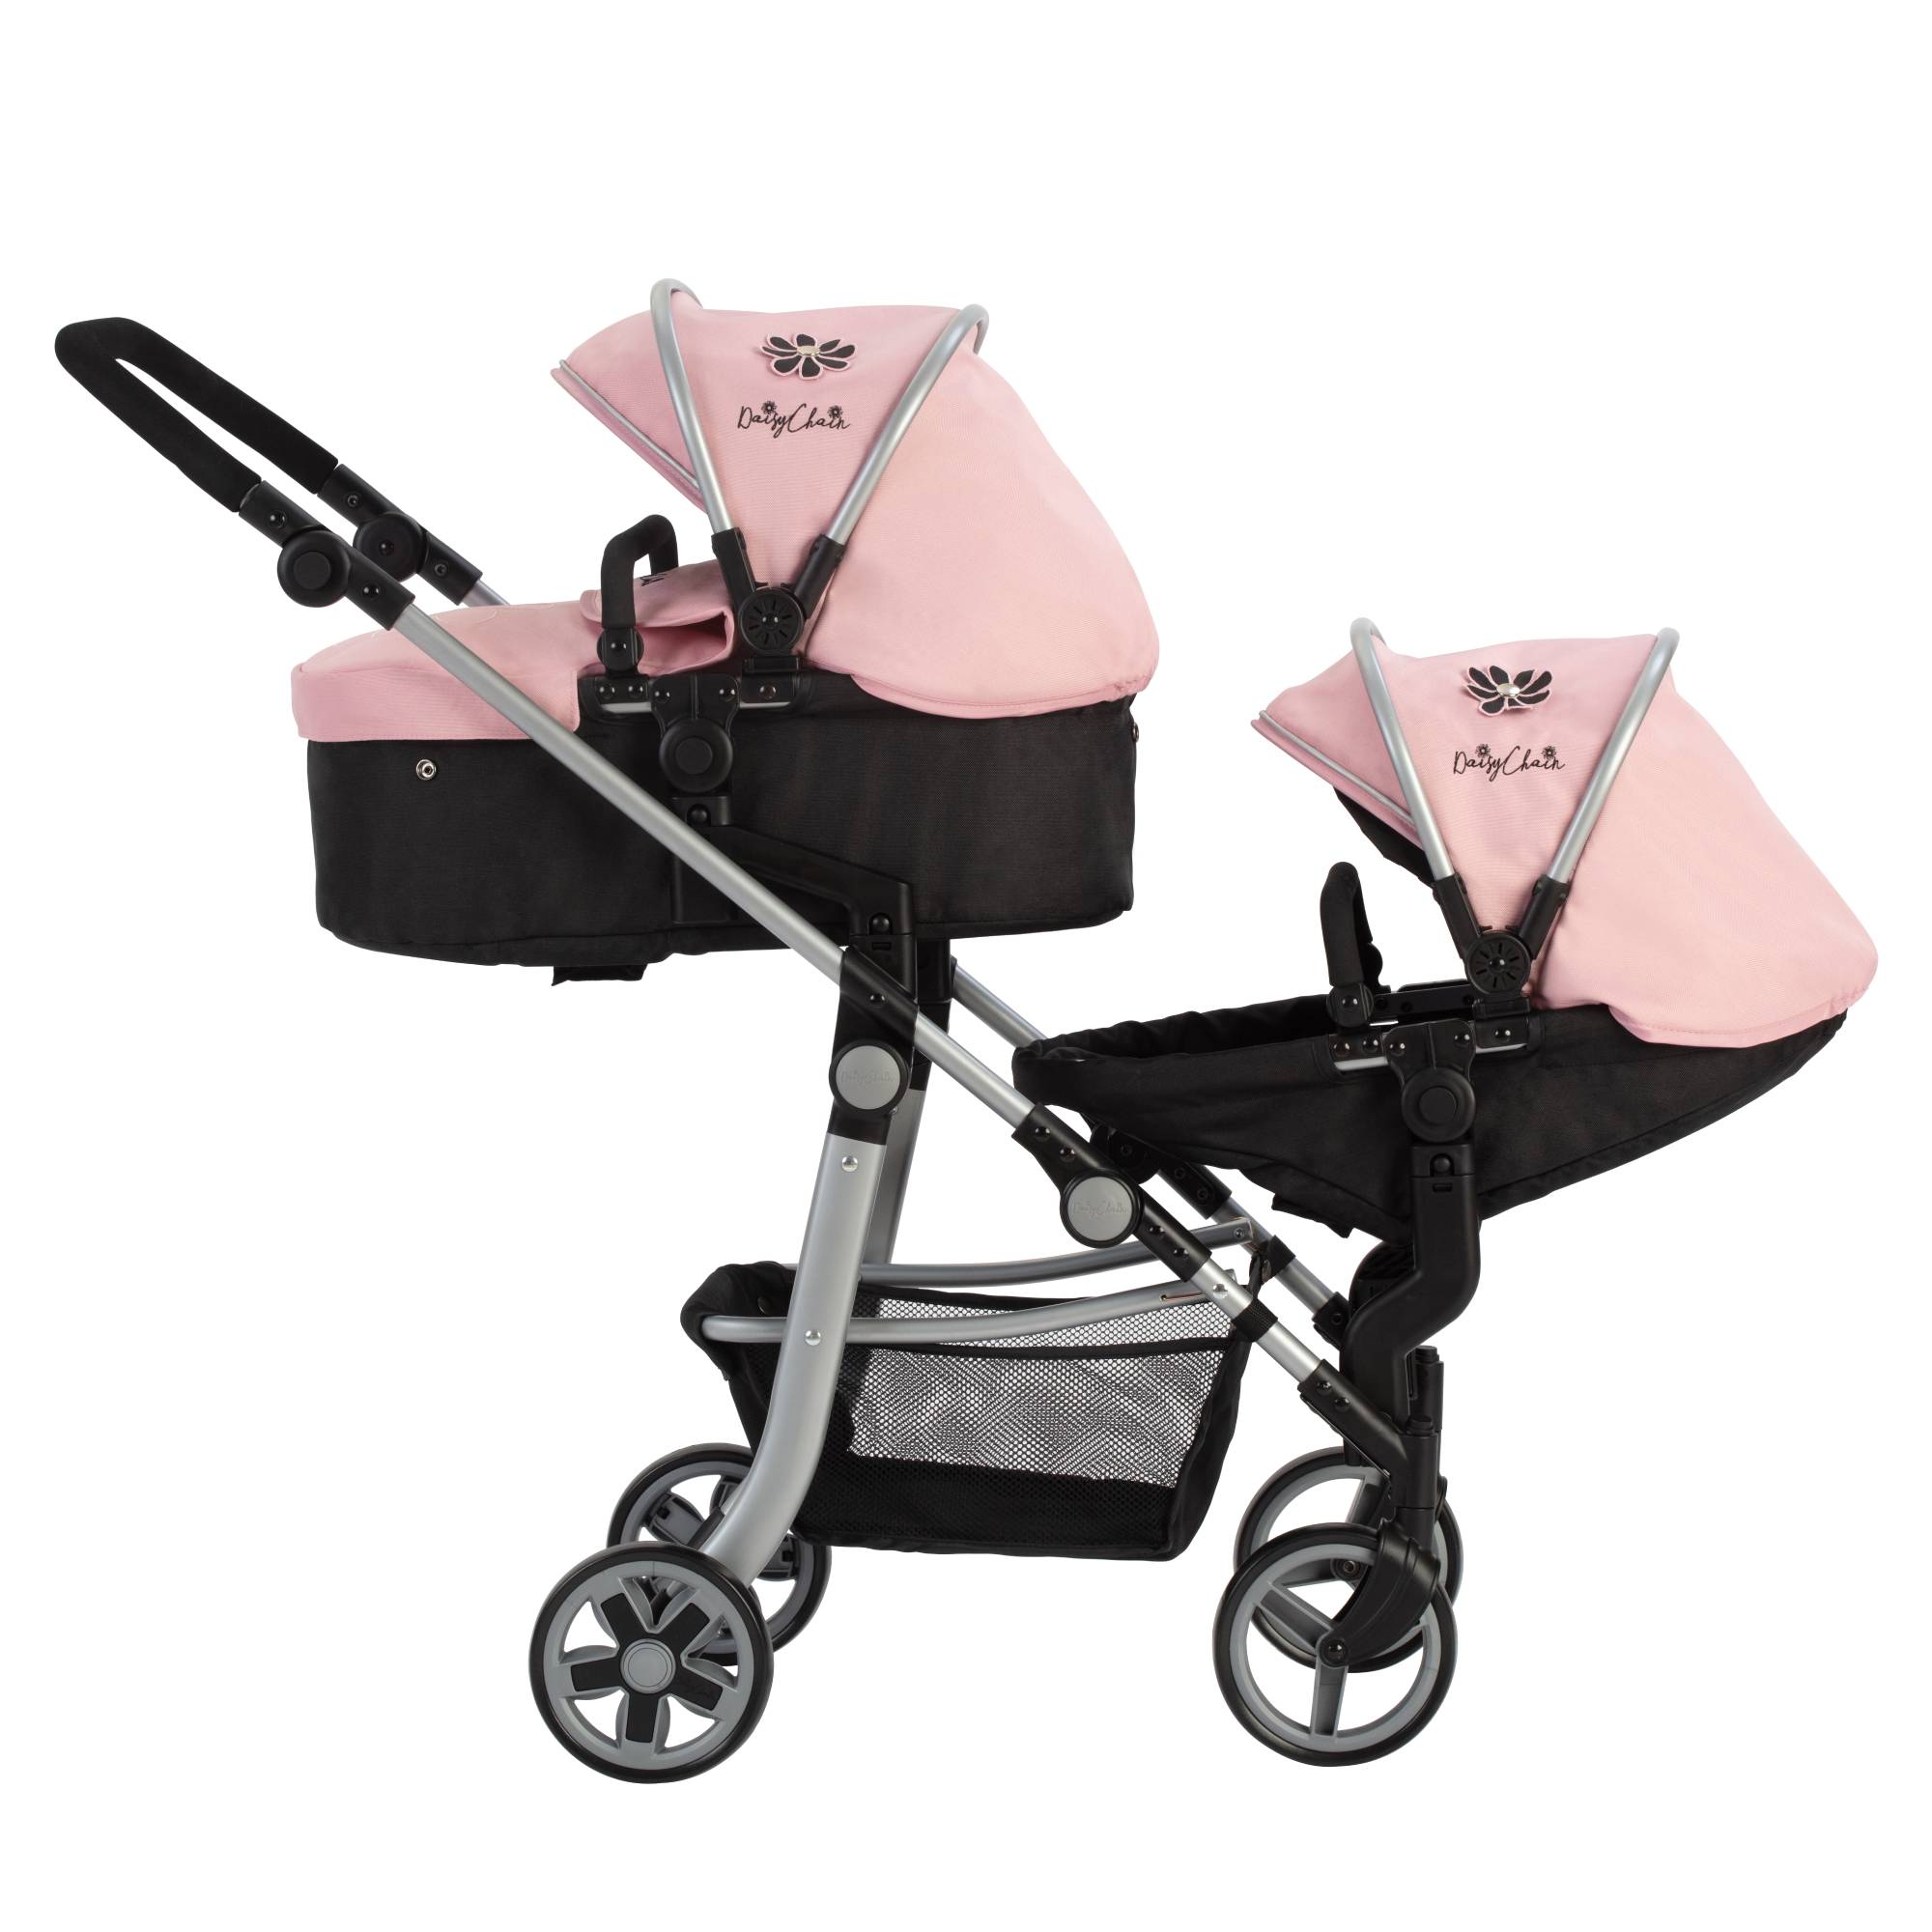 New Stars Dolls Pram Set for Daisy Chain Connect/Silver Cross Pioneer 